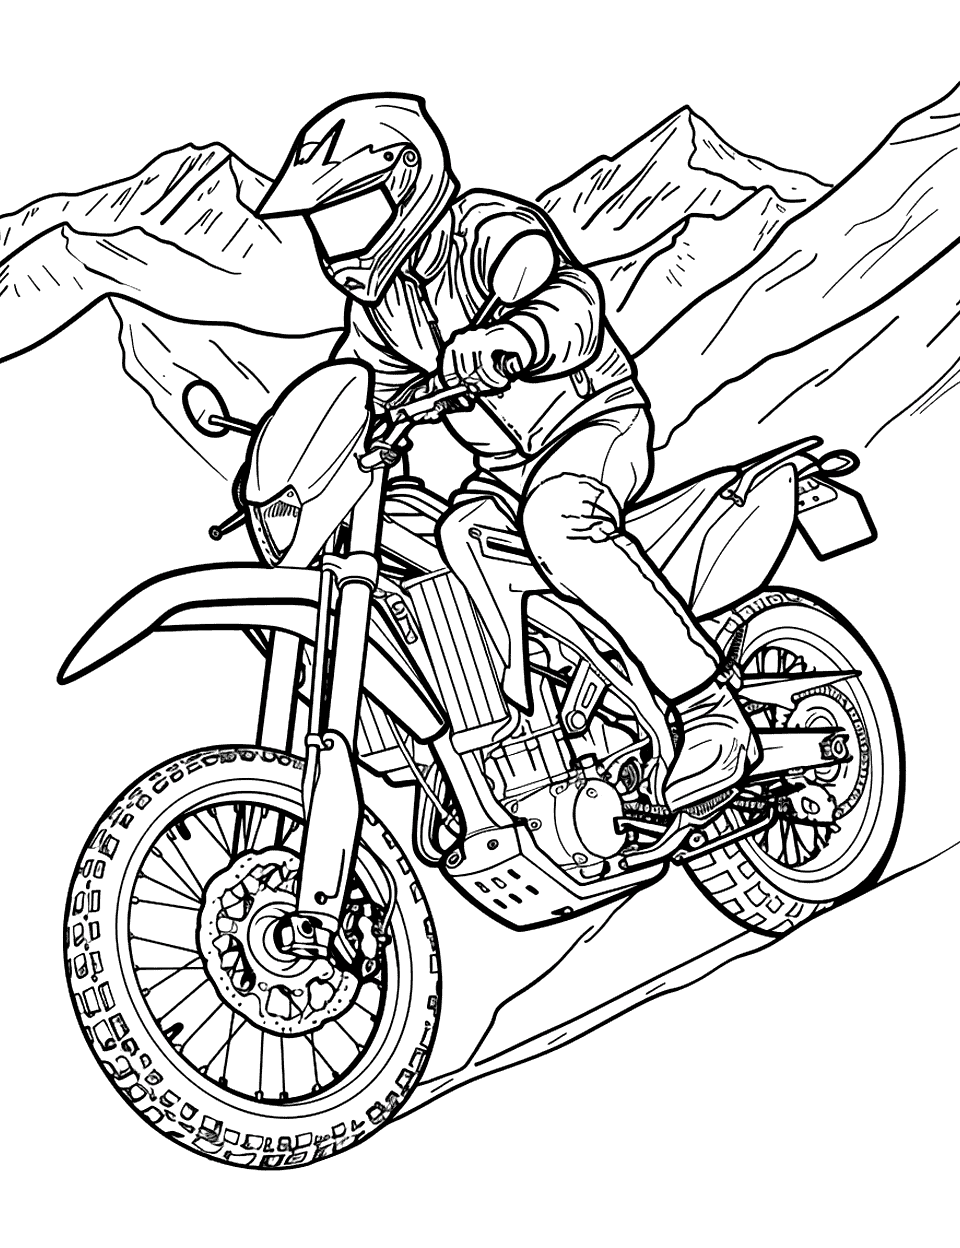 Mountain Motorcycle Ride Coloring Page - A motorcycle coming down a steep mountain road, with snow-capped peaks in the background.